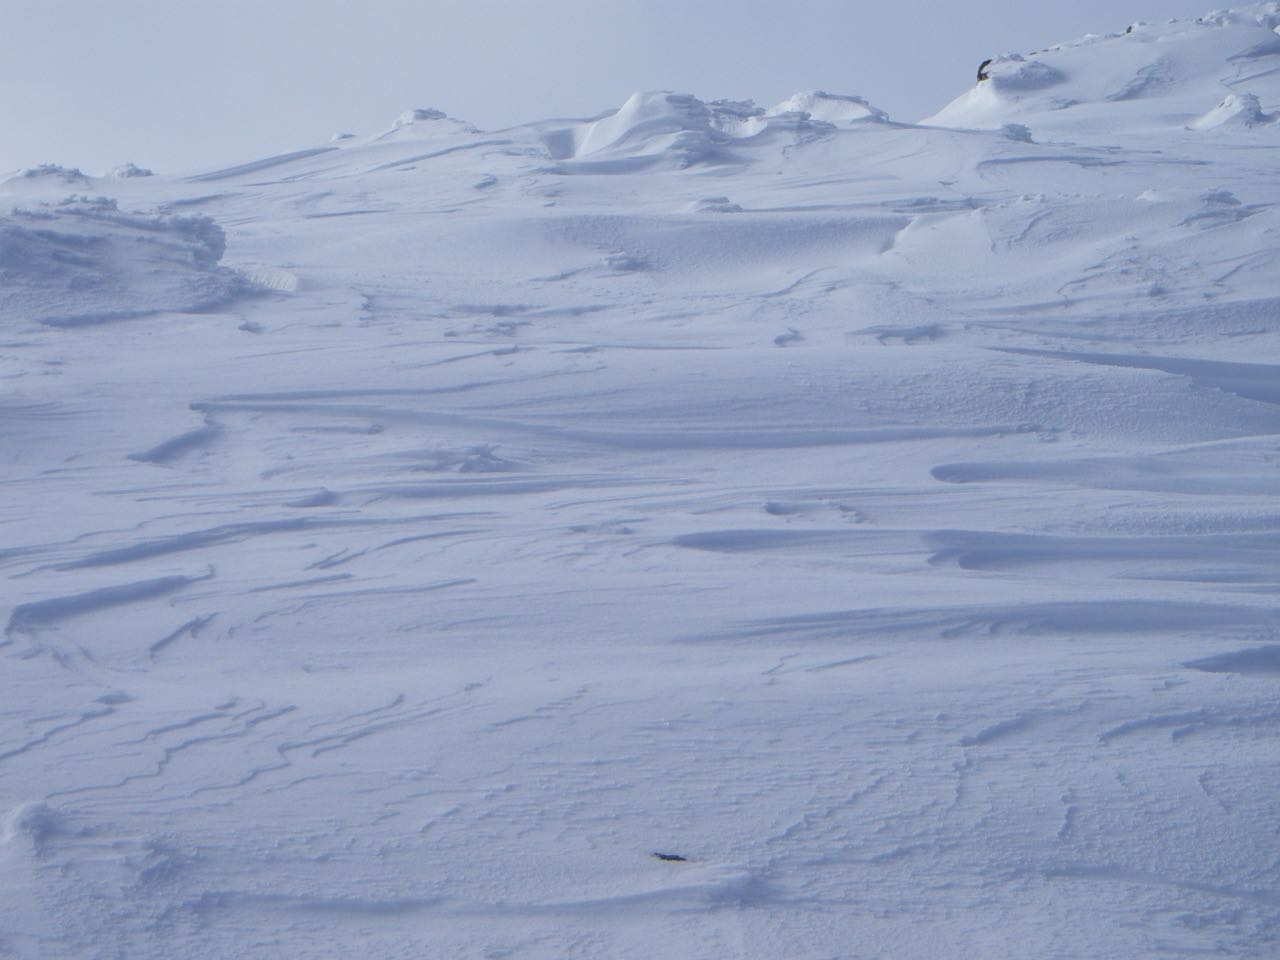 Beautiful wind-sculptured shapes on the snows surface